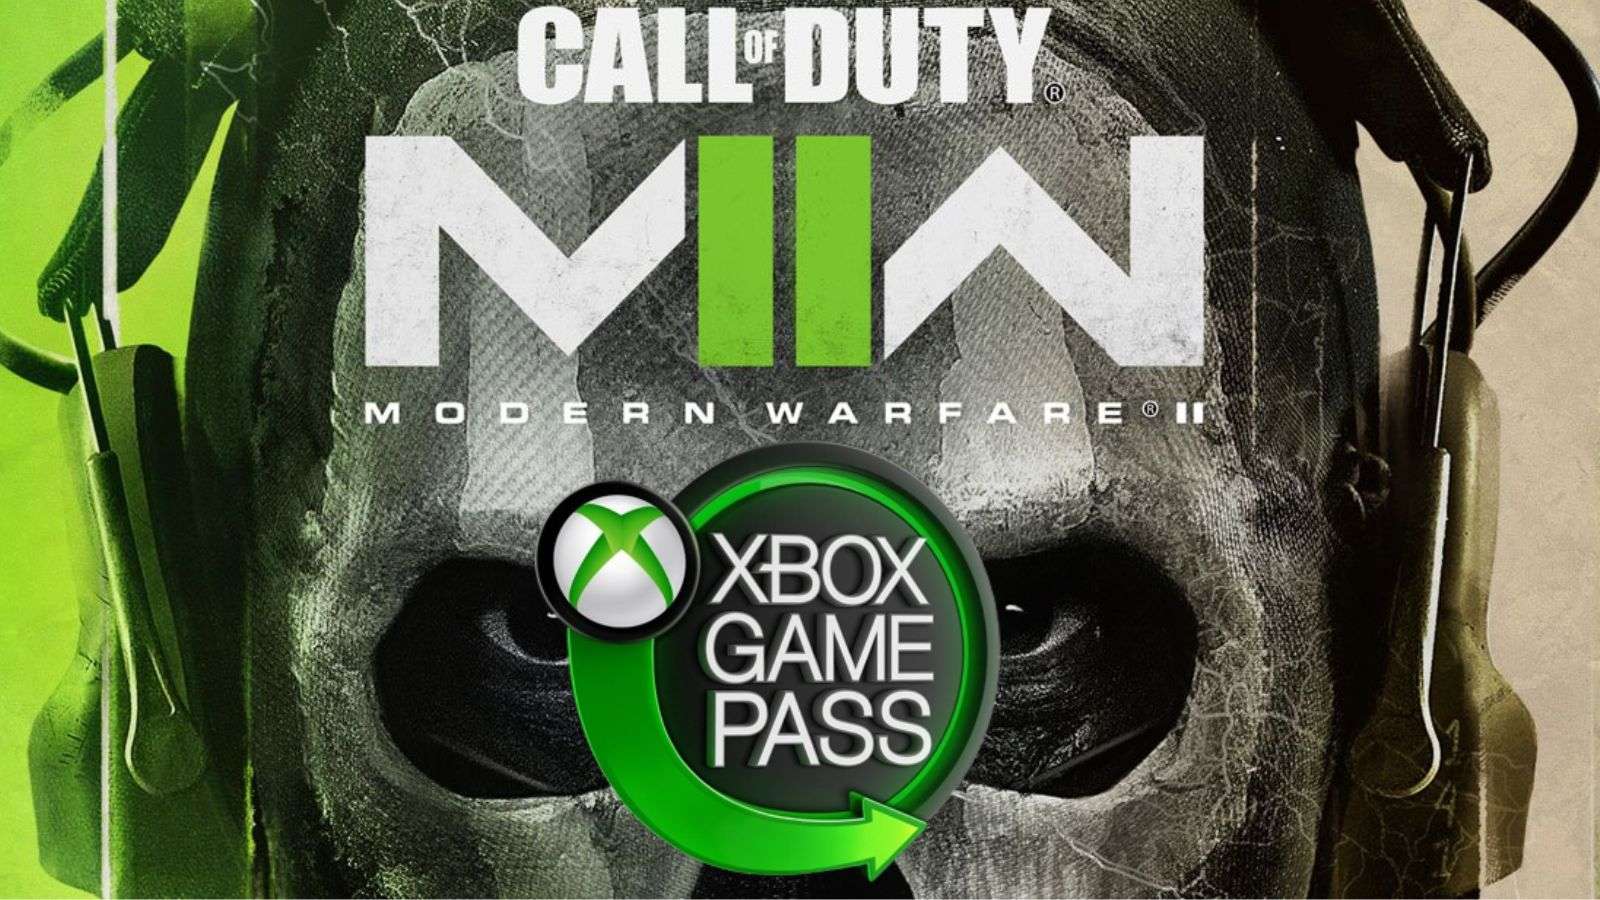 Modern Warfare 2 cover with gamepass logo over it